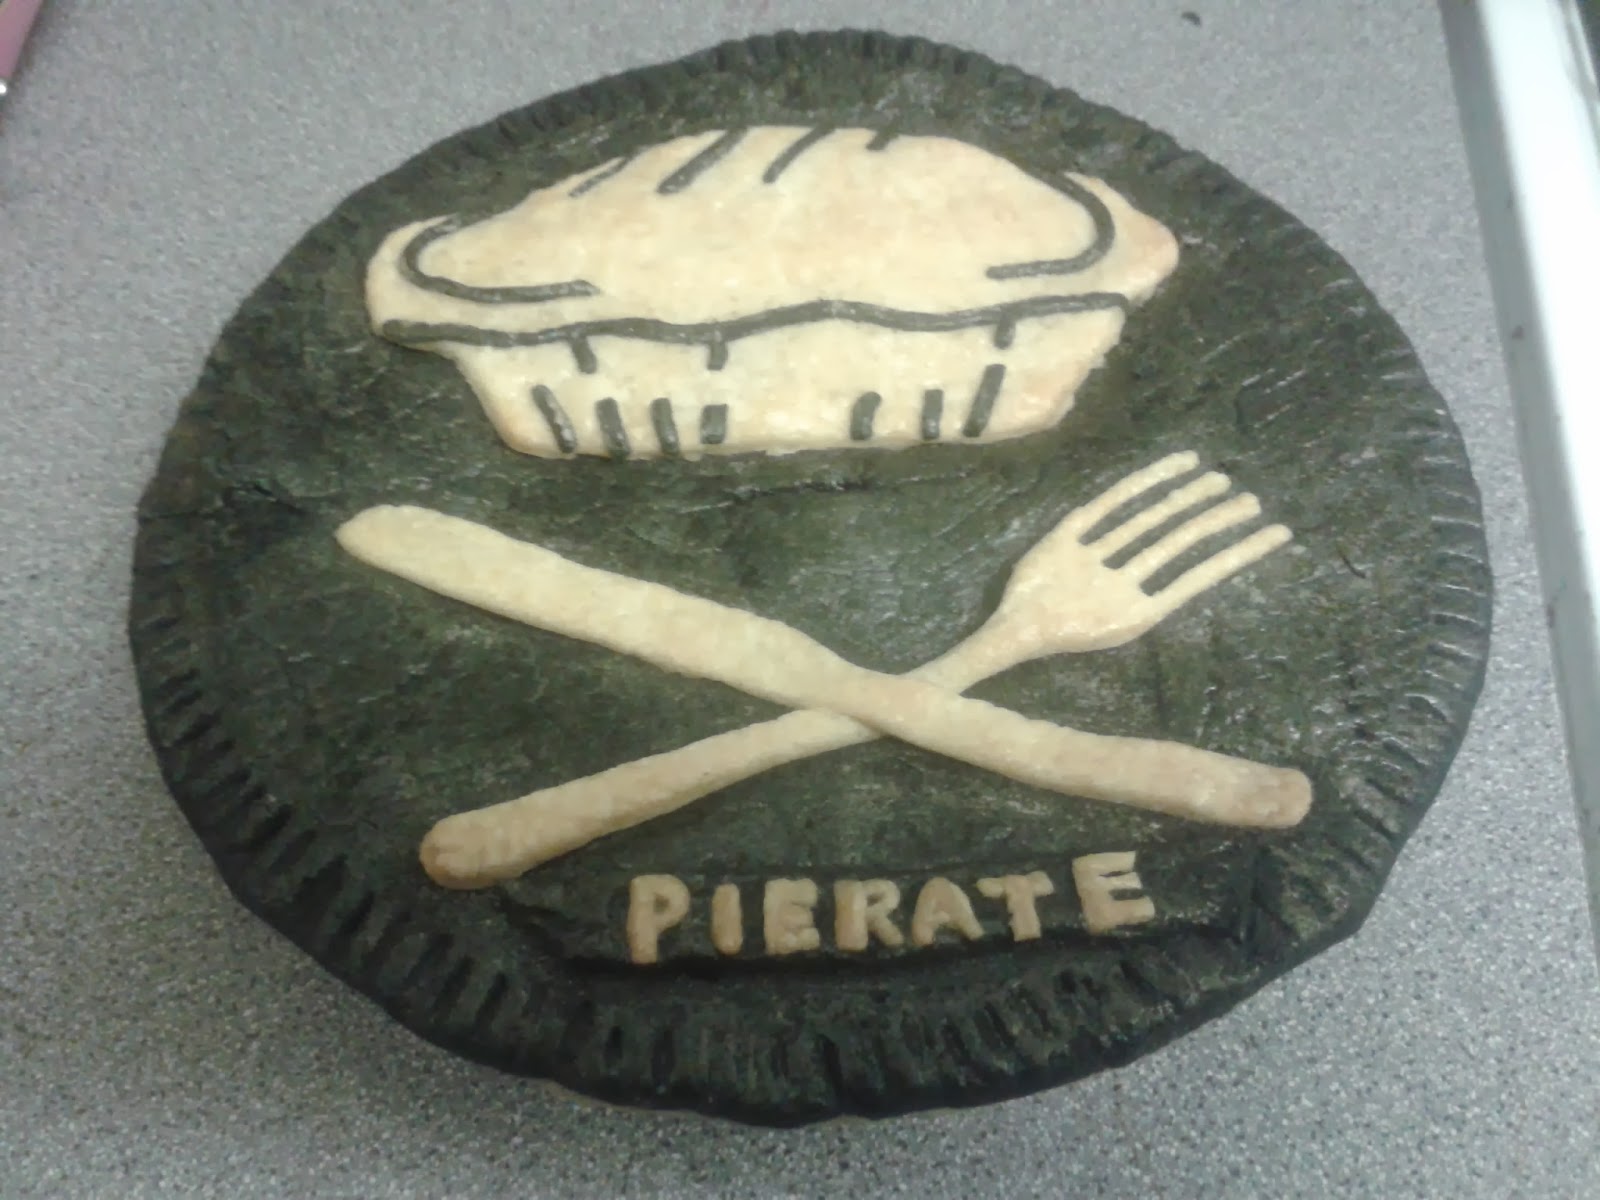 Pierate Logo Pie Review